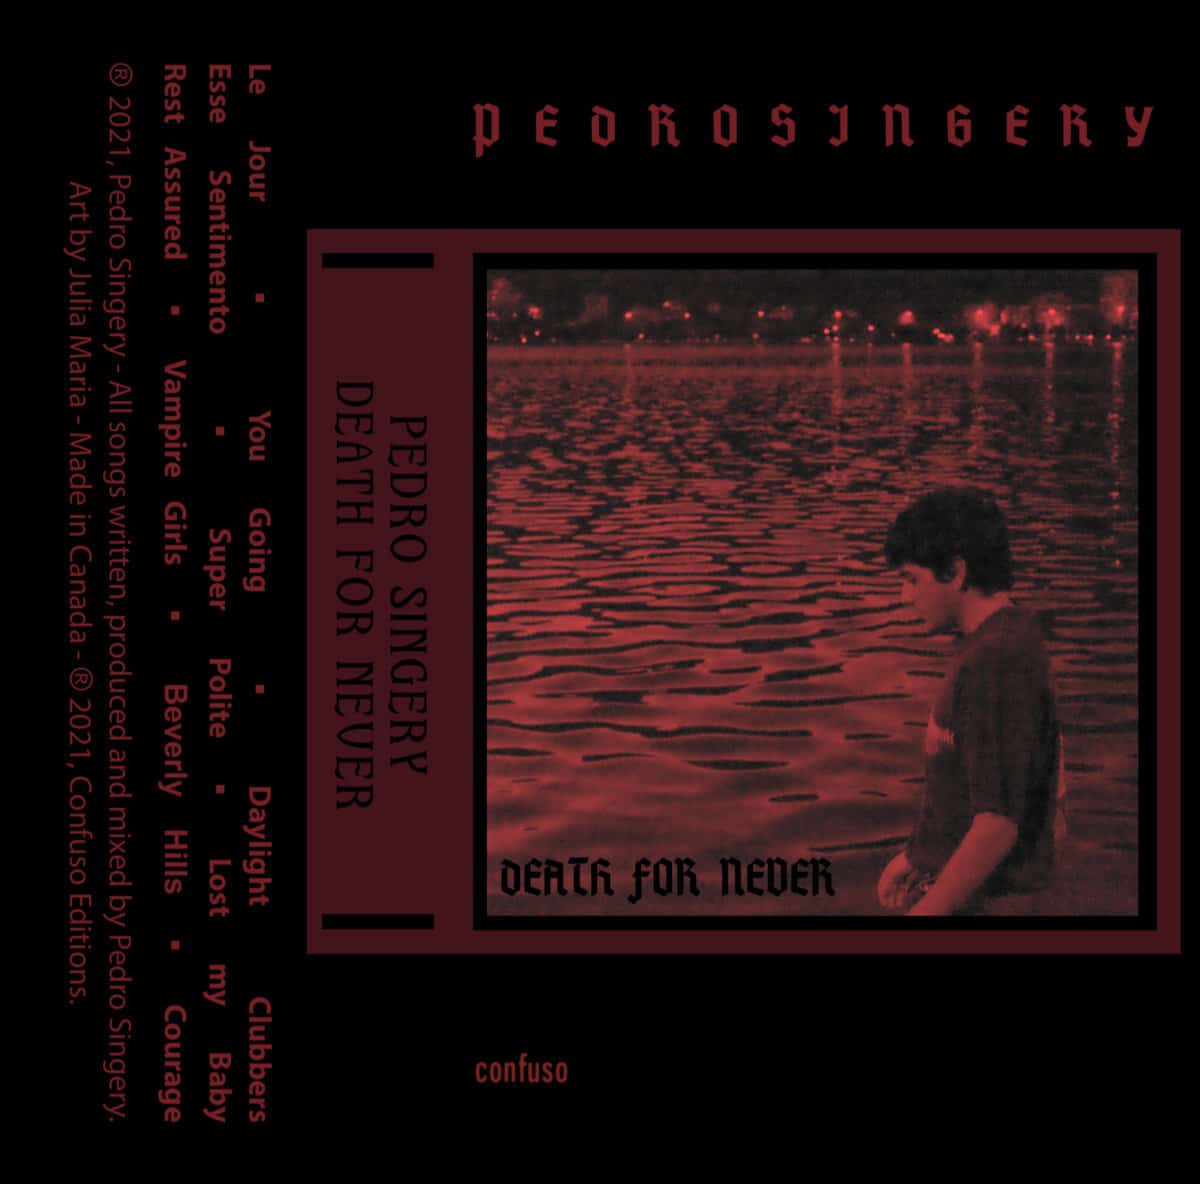 Pedro Singery - Death For Never - CF002 - CONFUSIO EDITIONS